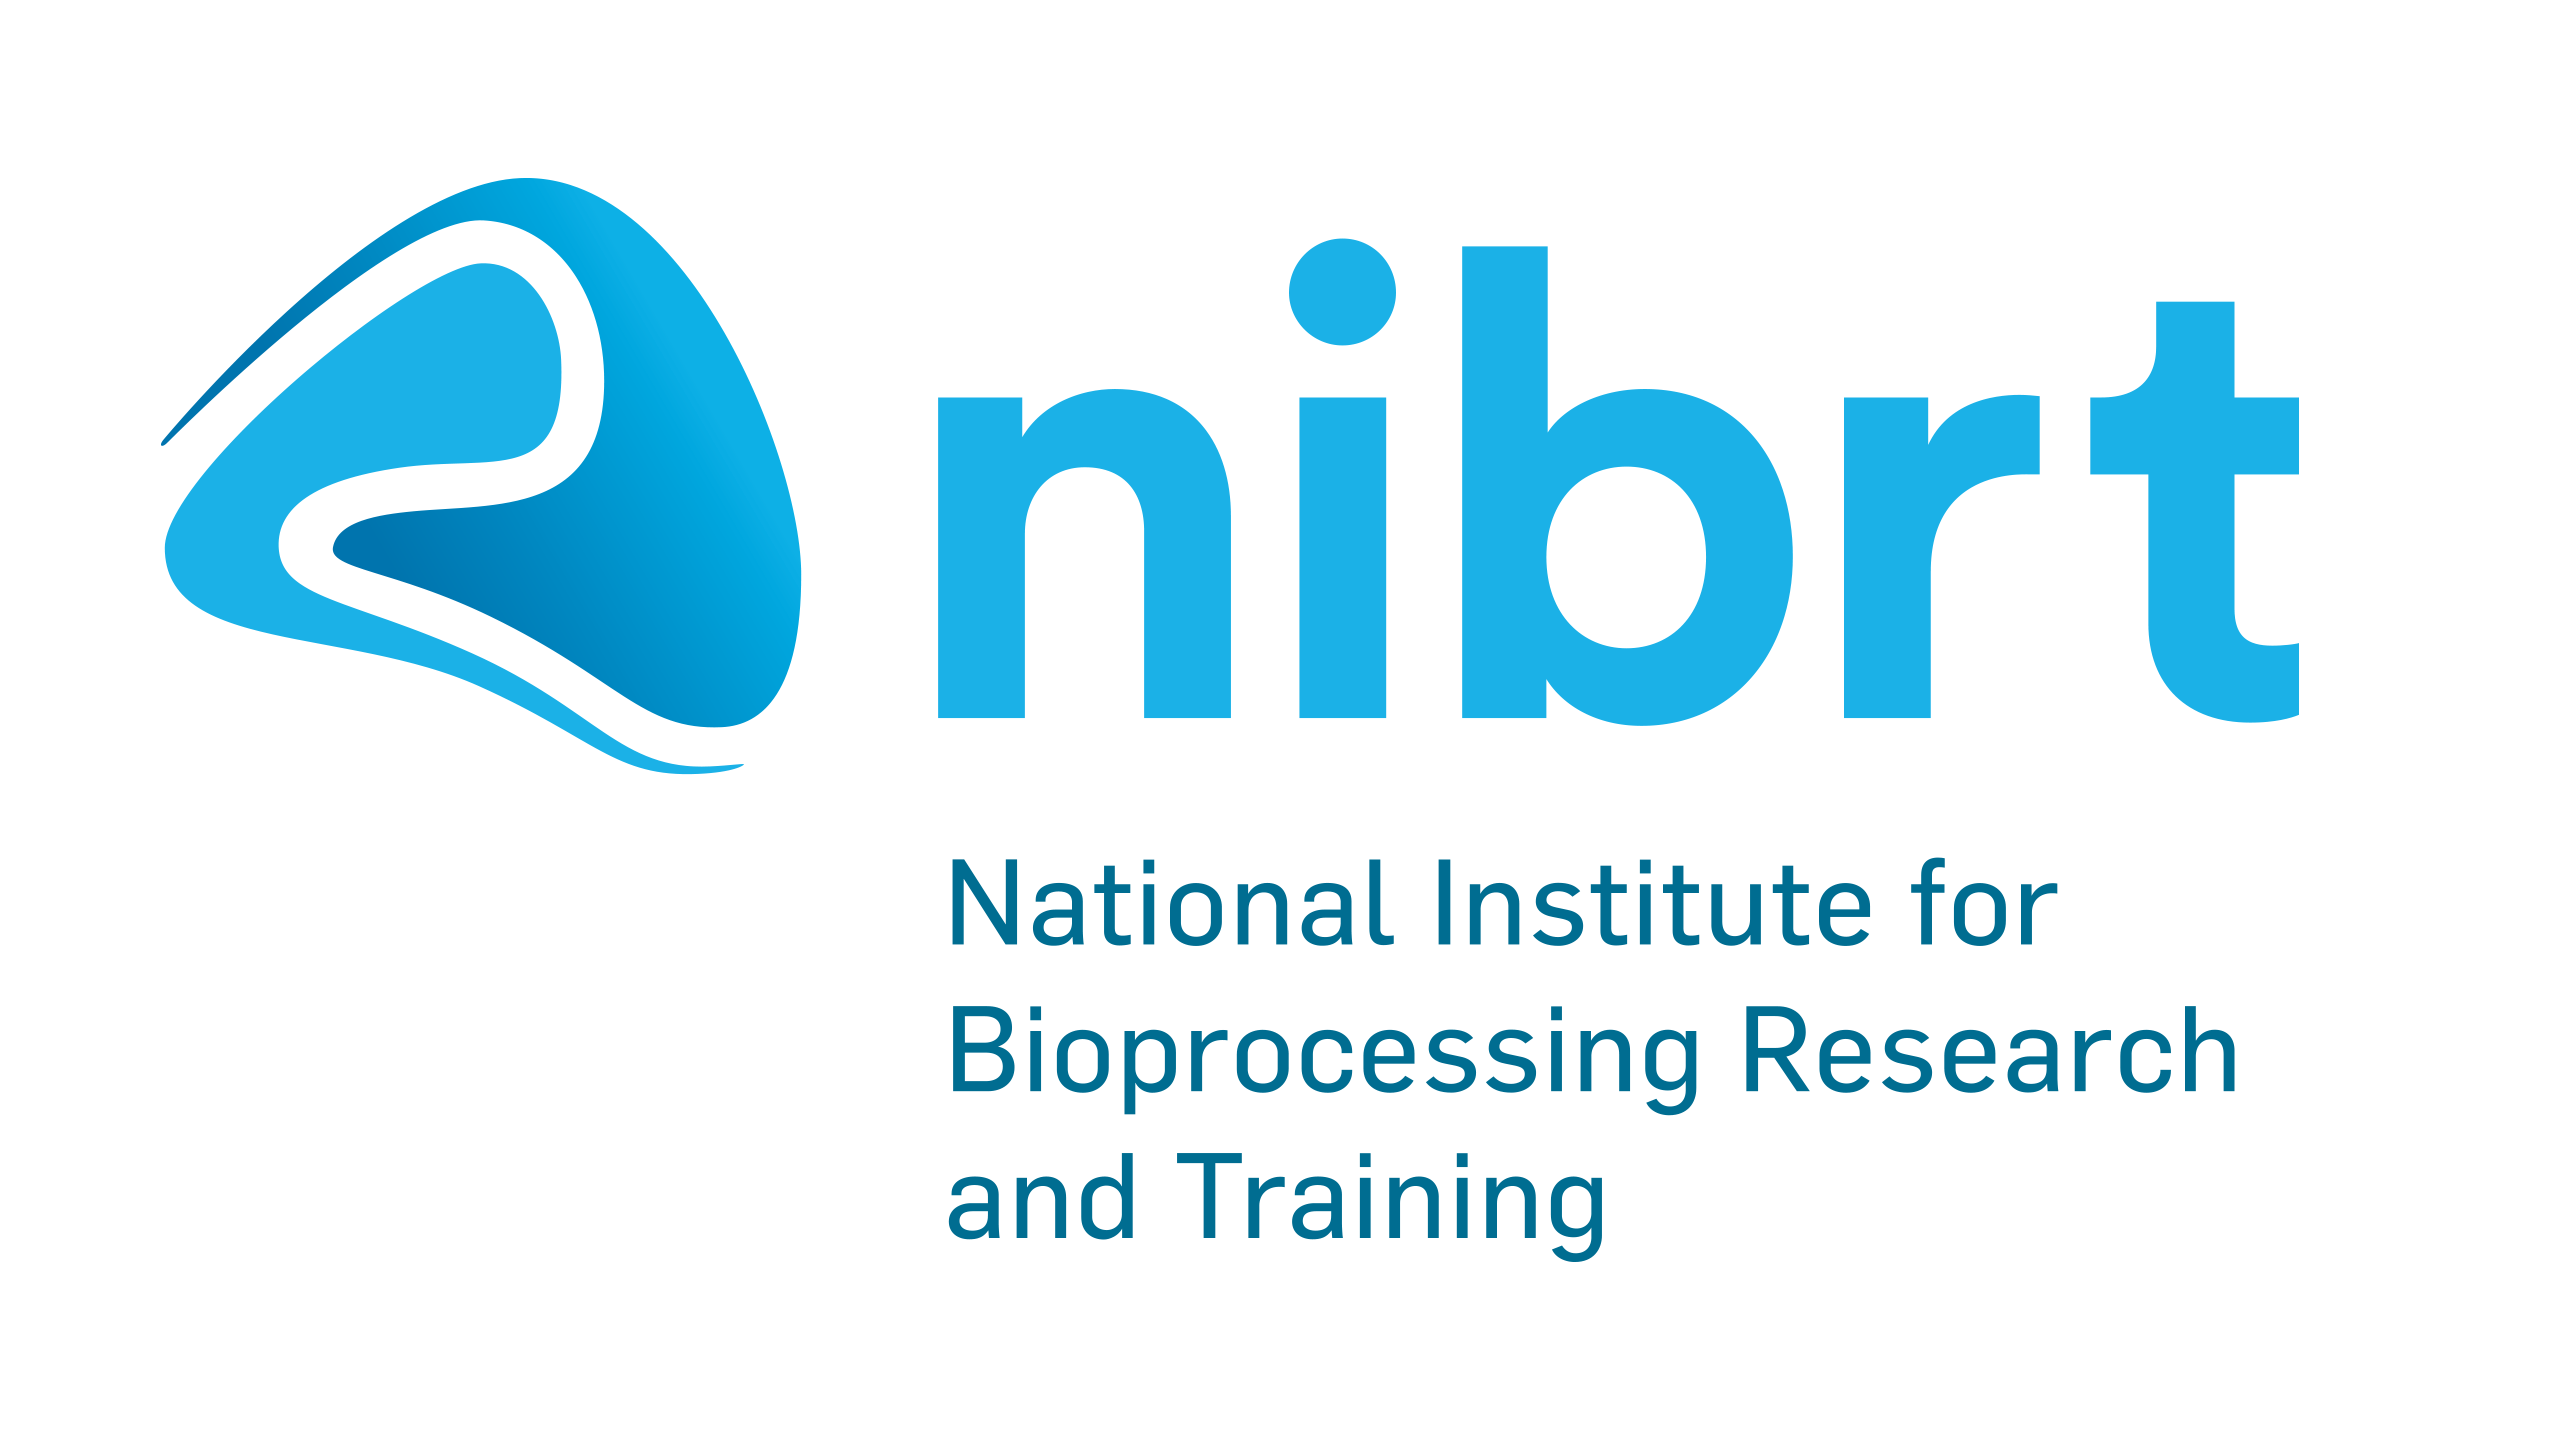 NIBRT (National Institute for Bioprocessing Research and Training)